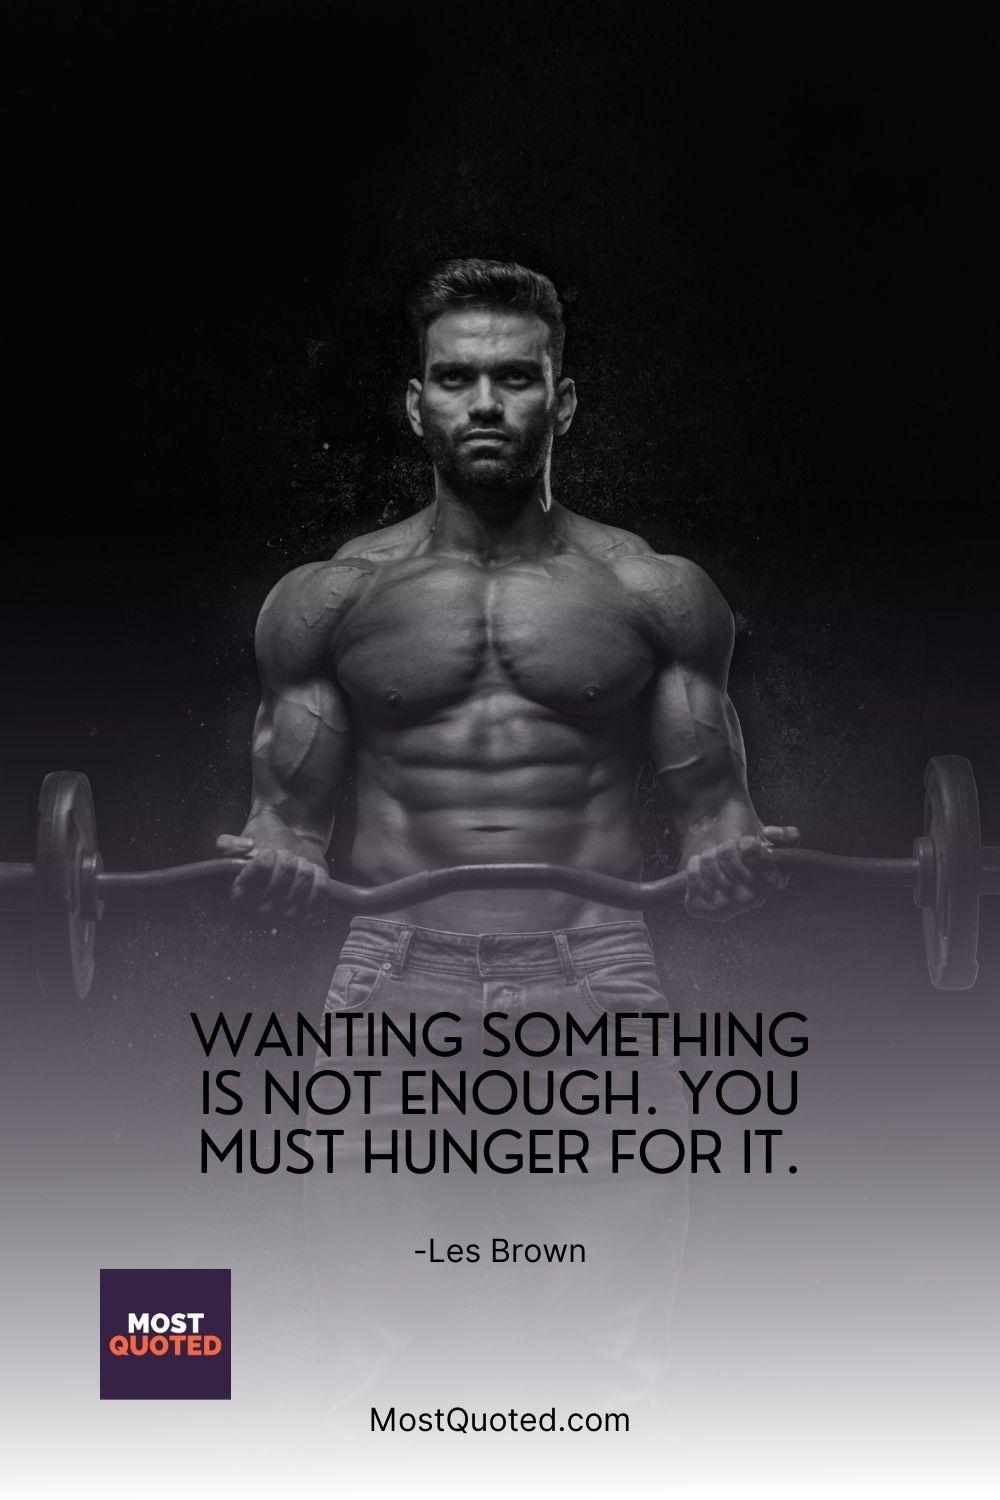 Wanting something is not enough. You must hunger for it.